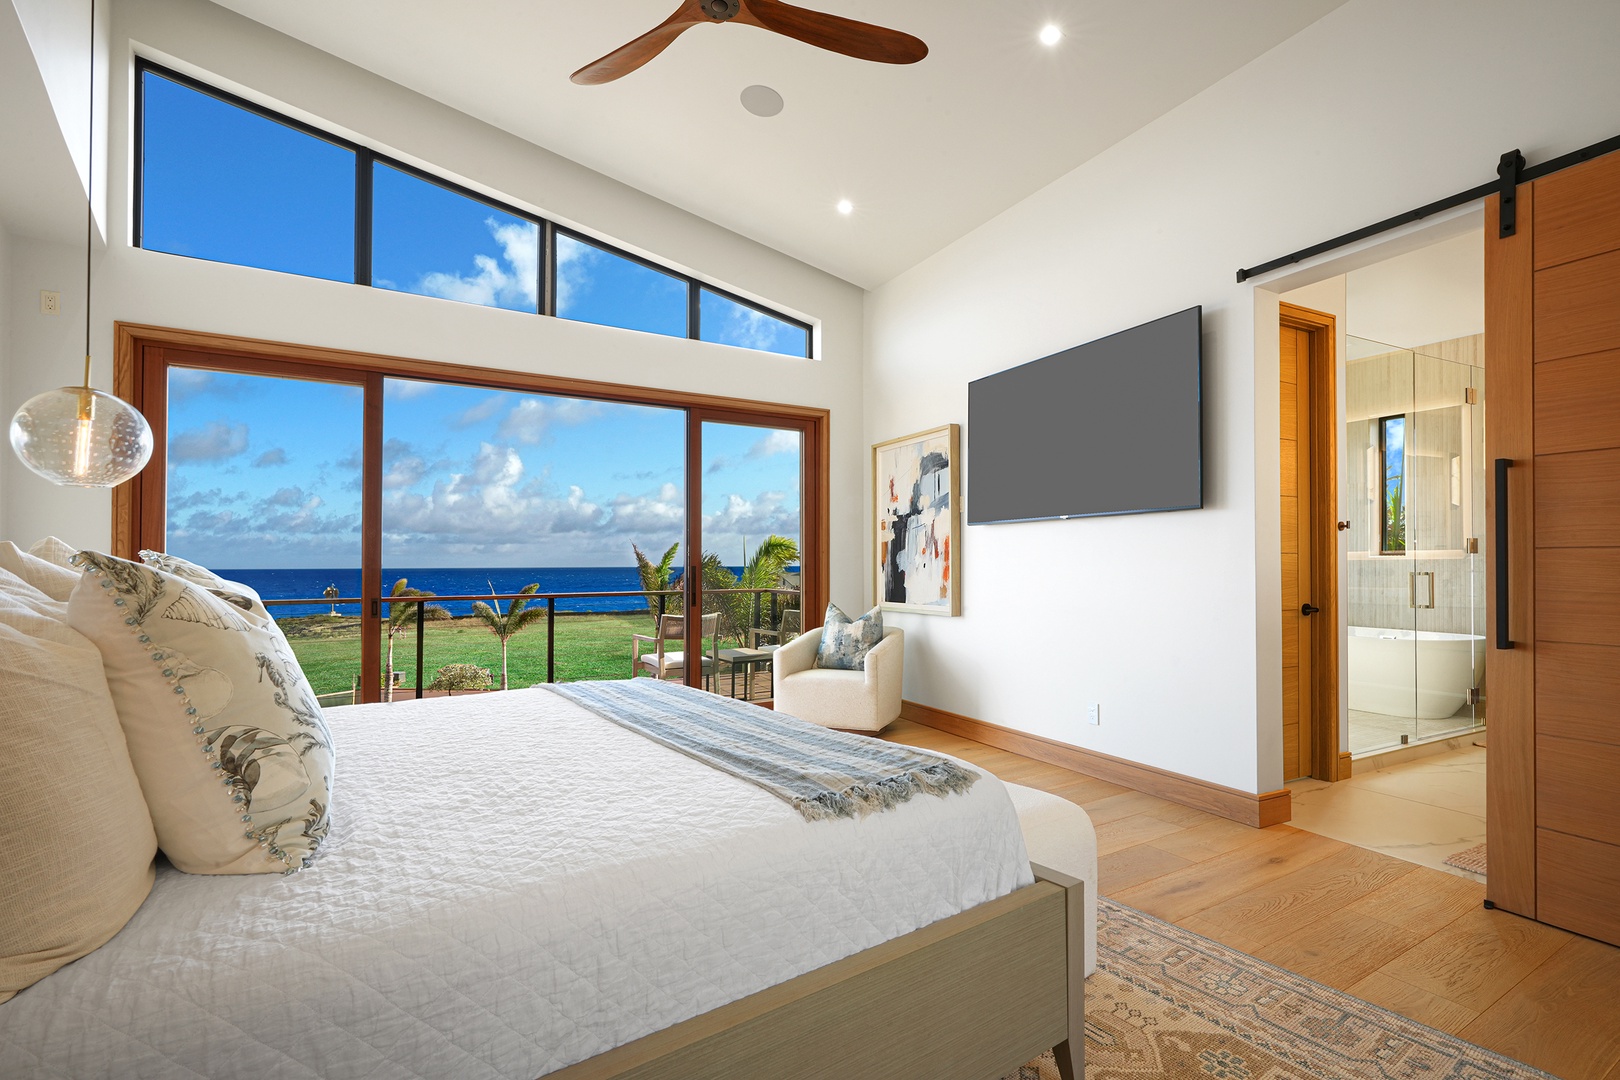 Koloa Vacation Rentals, Hale Makau - The second guest suite with TV, ensuite bath and floor-to-ceiling windows.